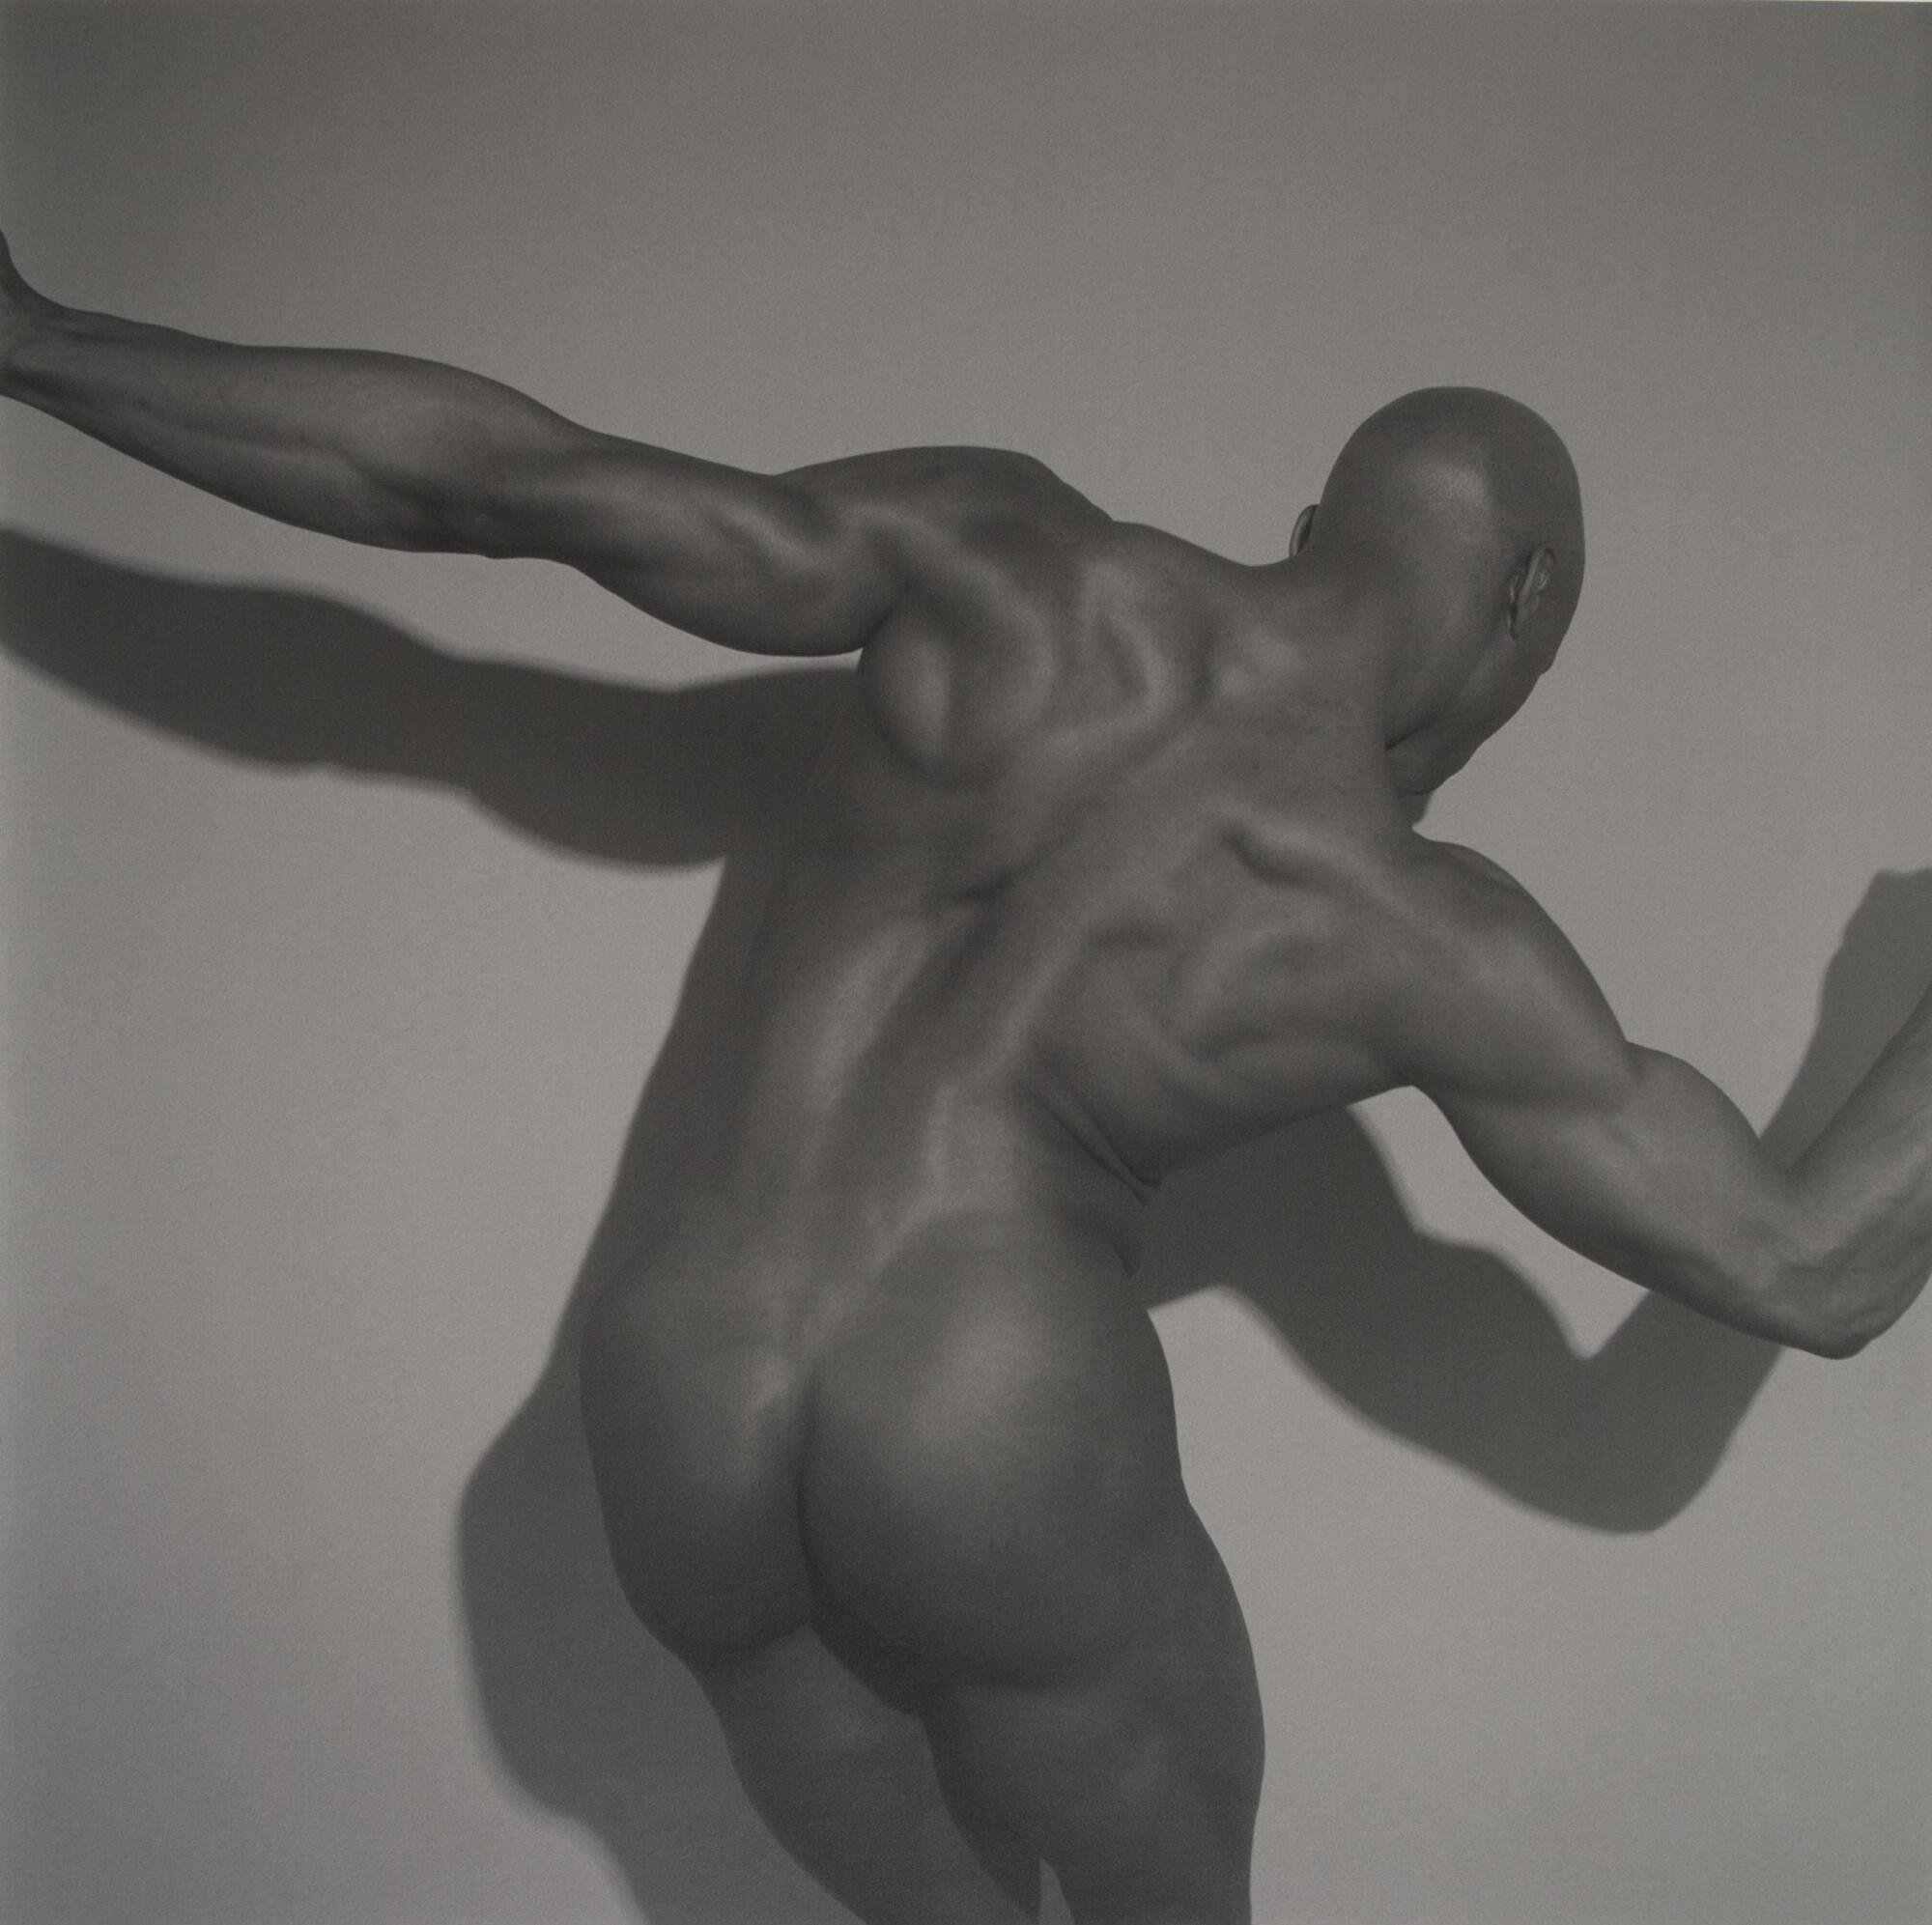 A nude posing in front of a white background. The man is posed with a slight lean and flexing his muscles, with a light source from the top-right casting a shadow on the background wall.